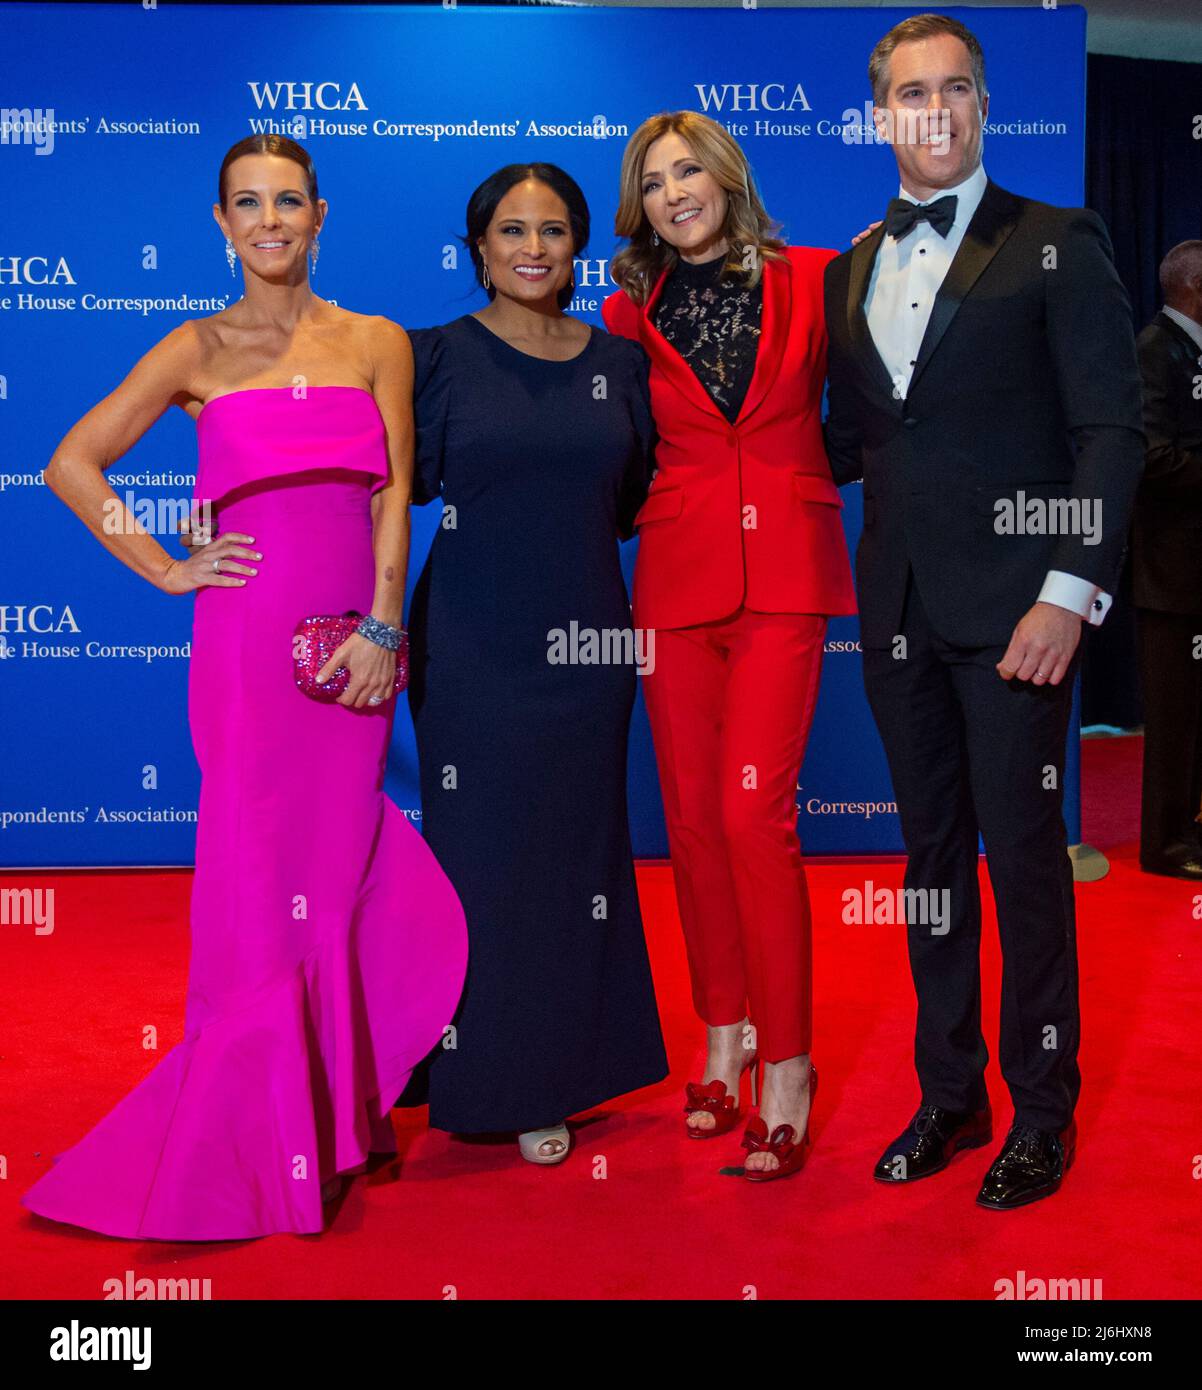 Stephanie Ruhle, left, Kristen Welker, second from left, Chris Jansing, second from right, and Peter Alexander, right, arrive for the 2022 White House Correspondents Association Annual Dinner at the Washington Hilton Hotel on Saturday, April 30, 2022. This is the first time since 2019 that the WHCA has held its annual dinner due to the COVID-19 pandemic. Photo by Rod Lamkey/CNP/ABACAPRESS.COM Stock Photo